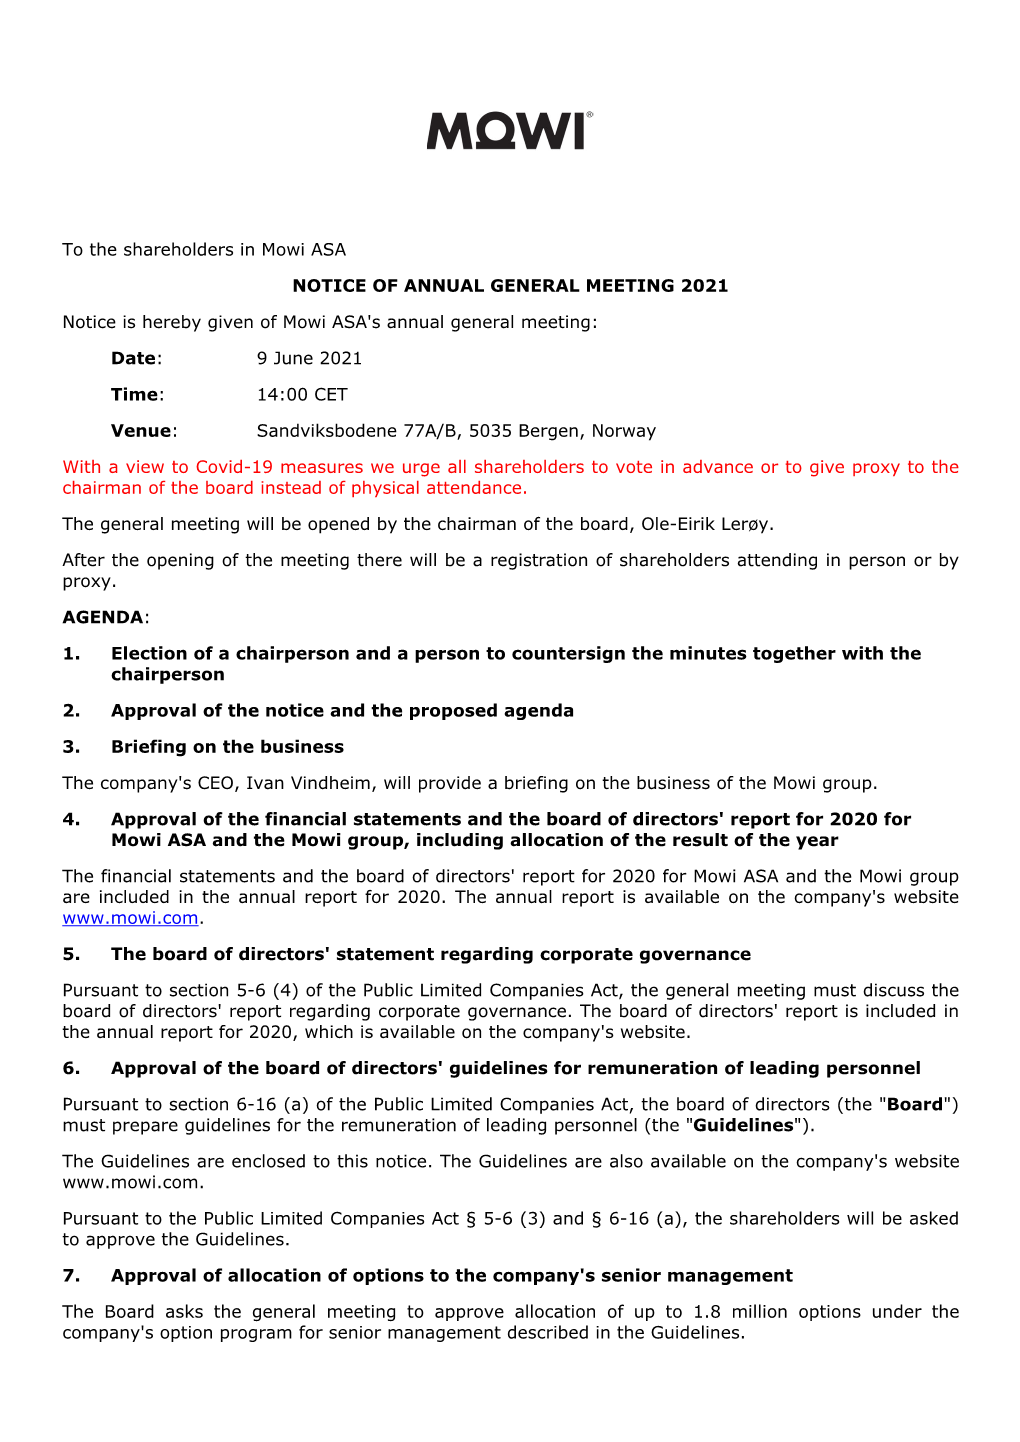 To the Shareholders in Mowi ASA NOTICE of ANNUAL GENERAL MEETING 2021 Notice Is Hereby Given of Mowi ASA's Annual General Meetin